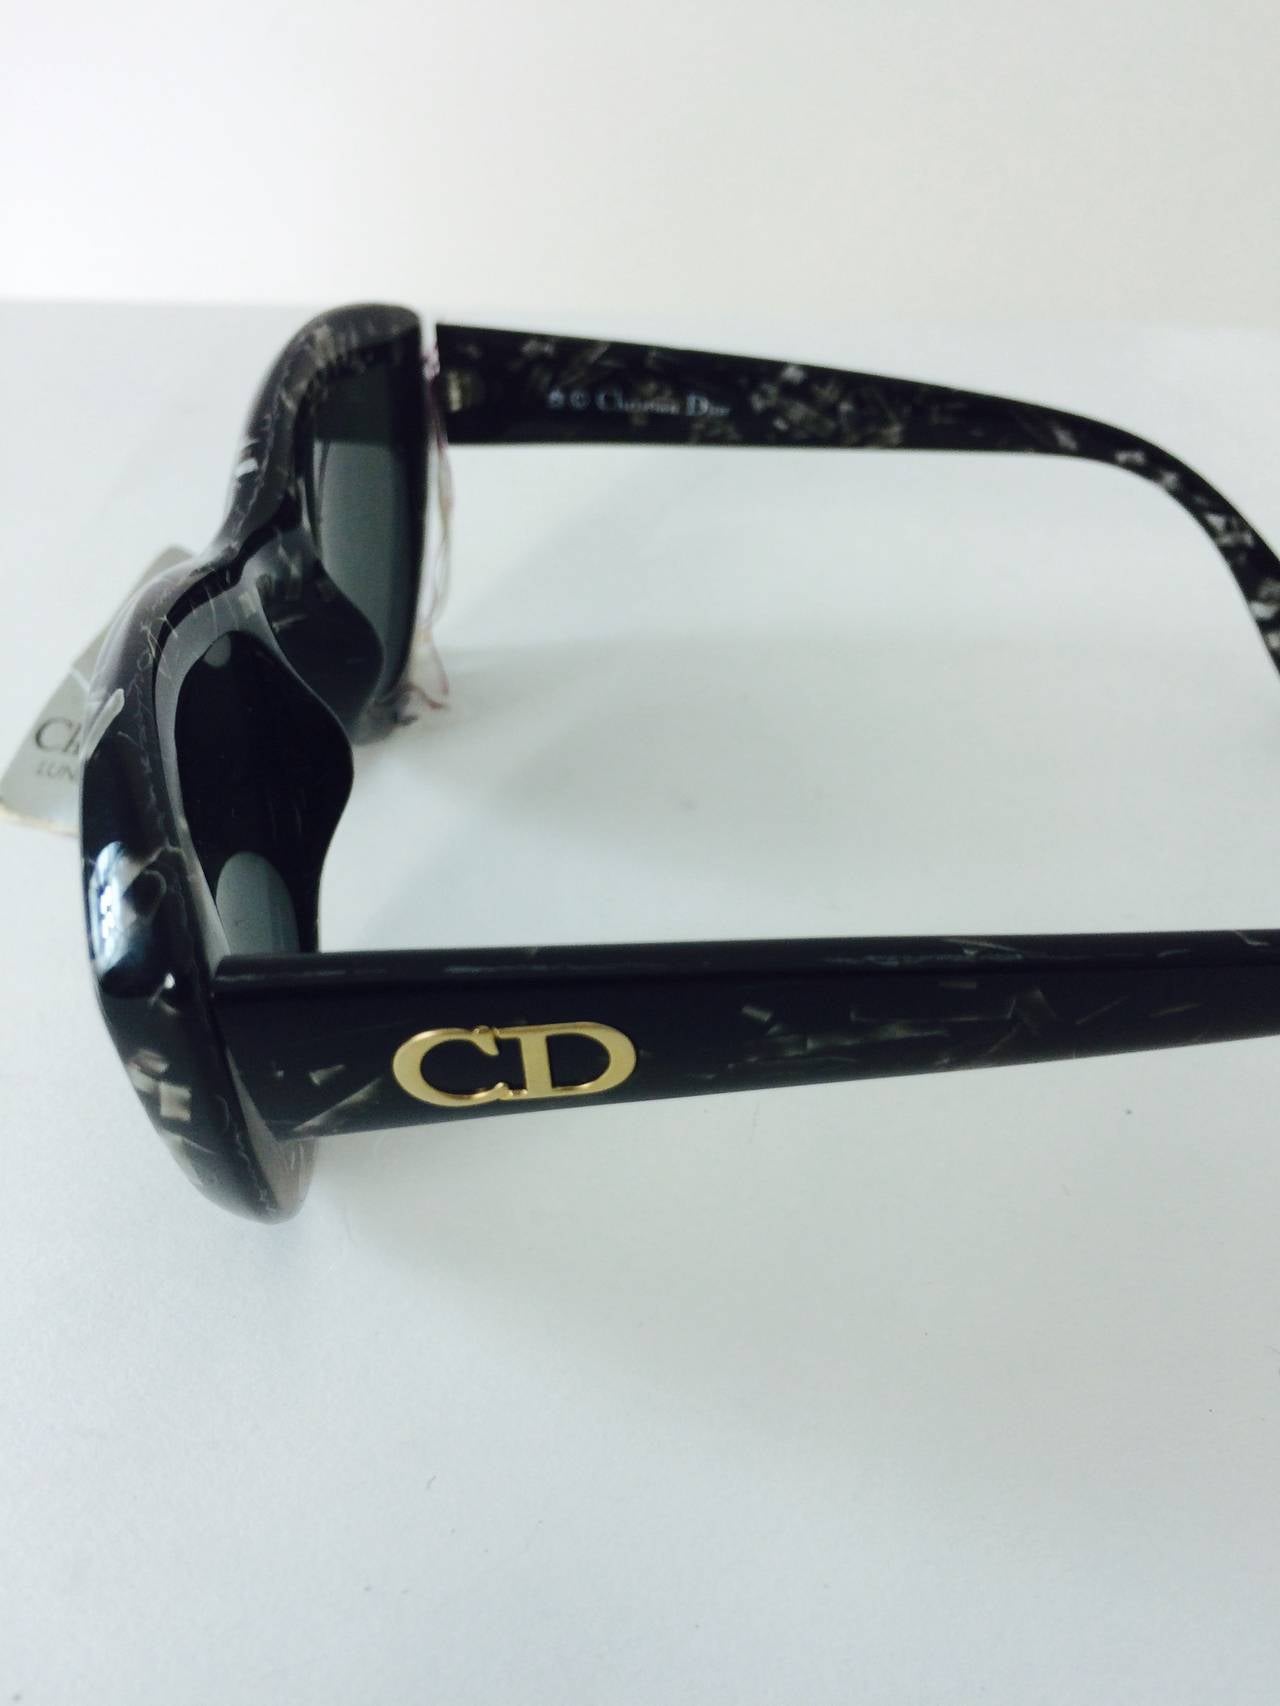 1970s Christian Dior sunglasses in black and grey fleck new with tags ...